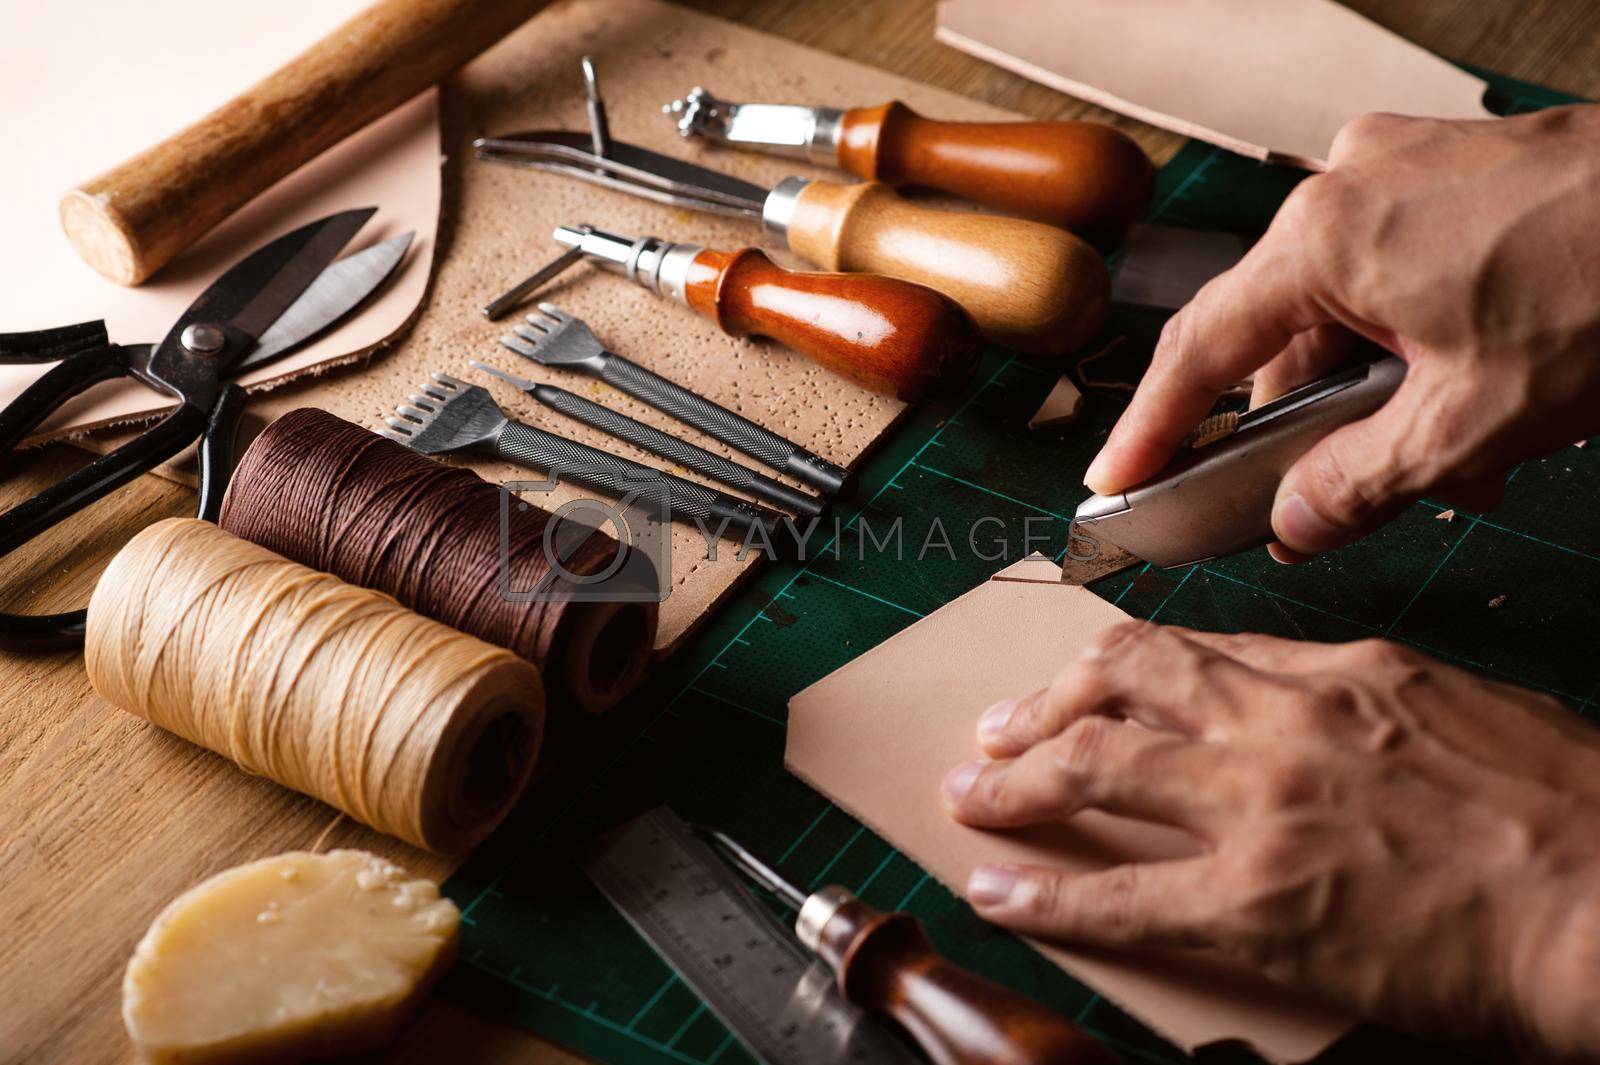 Royalty free image of working with vegetable tanned leather by norgal